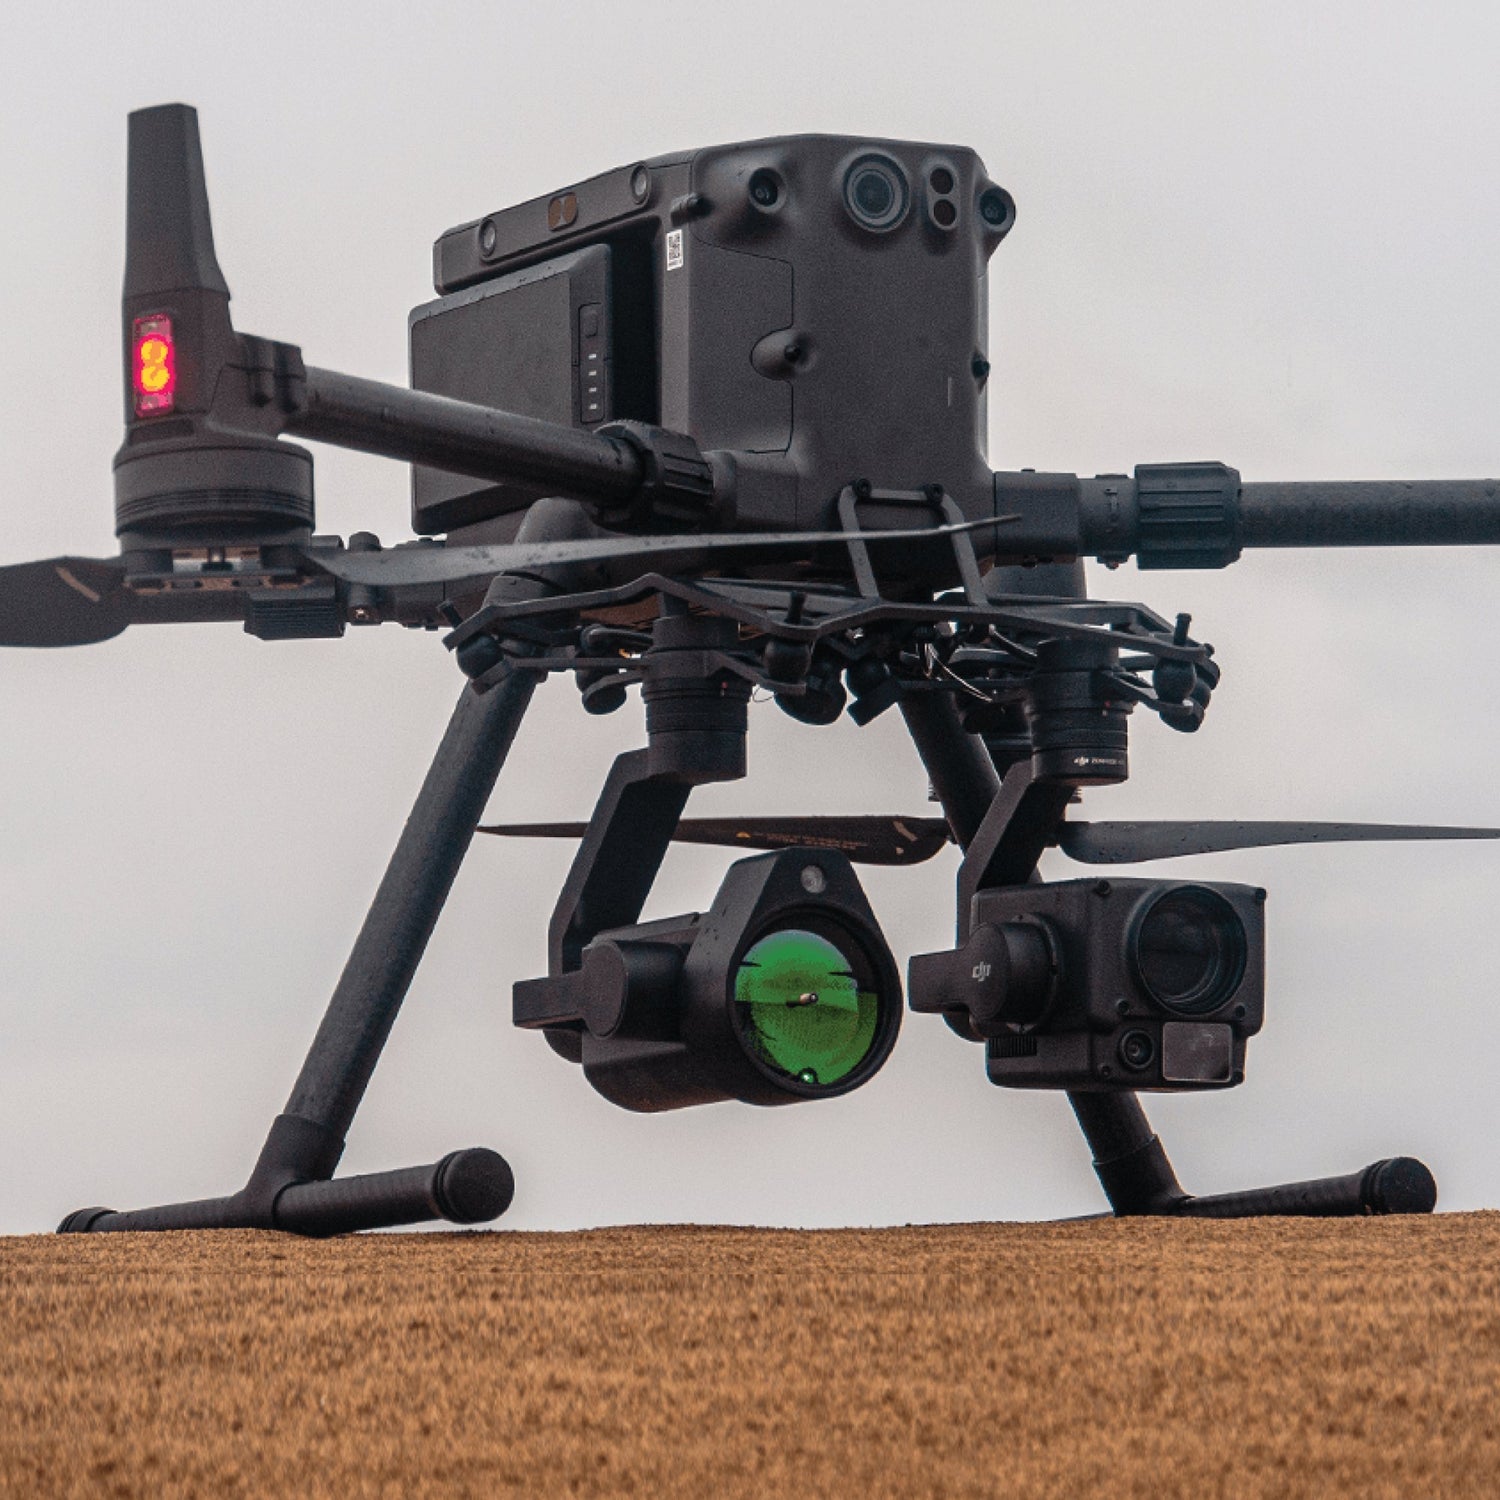 Taking Flight: Gas Detection Methods and Sensors for Drones - iRed Limited